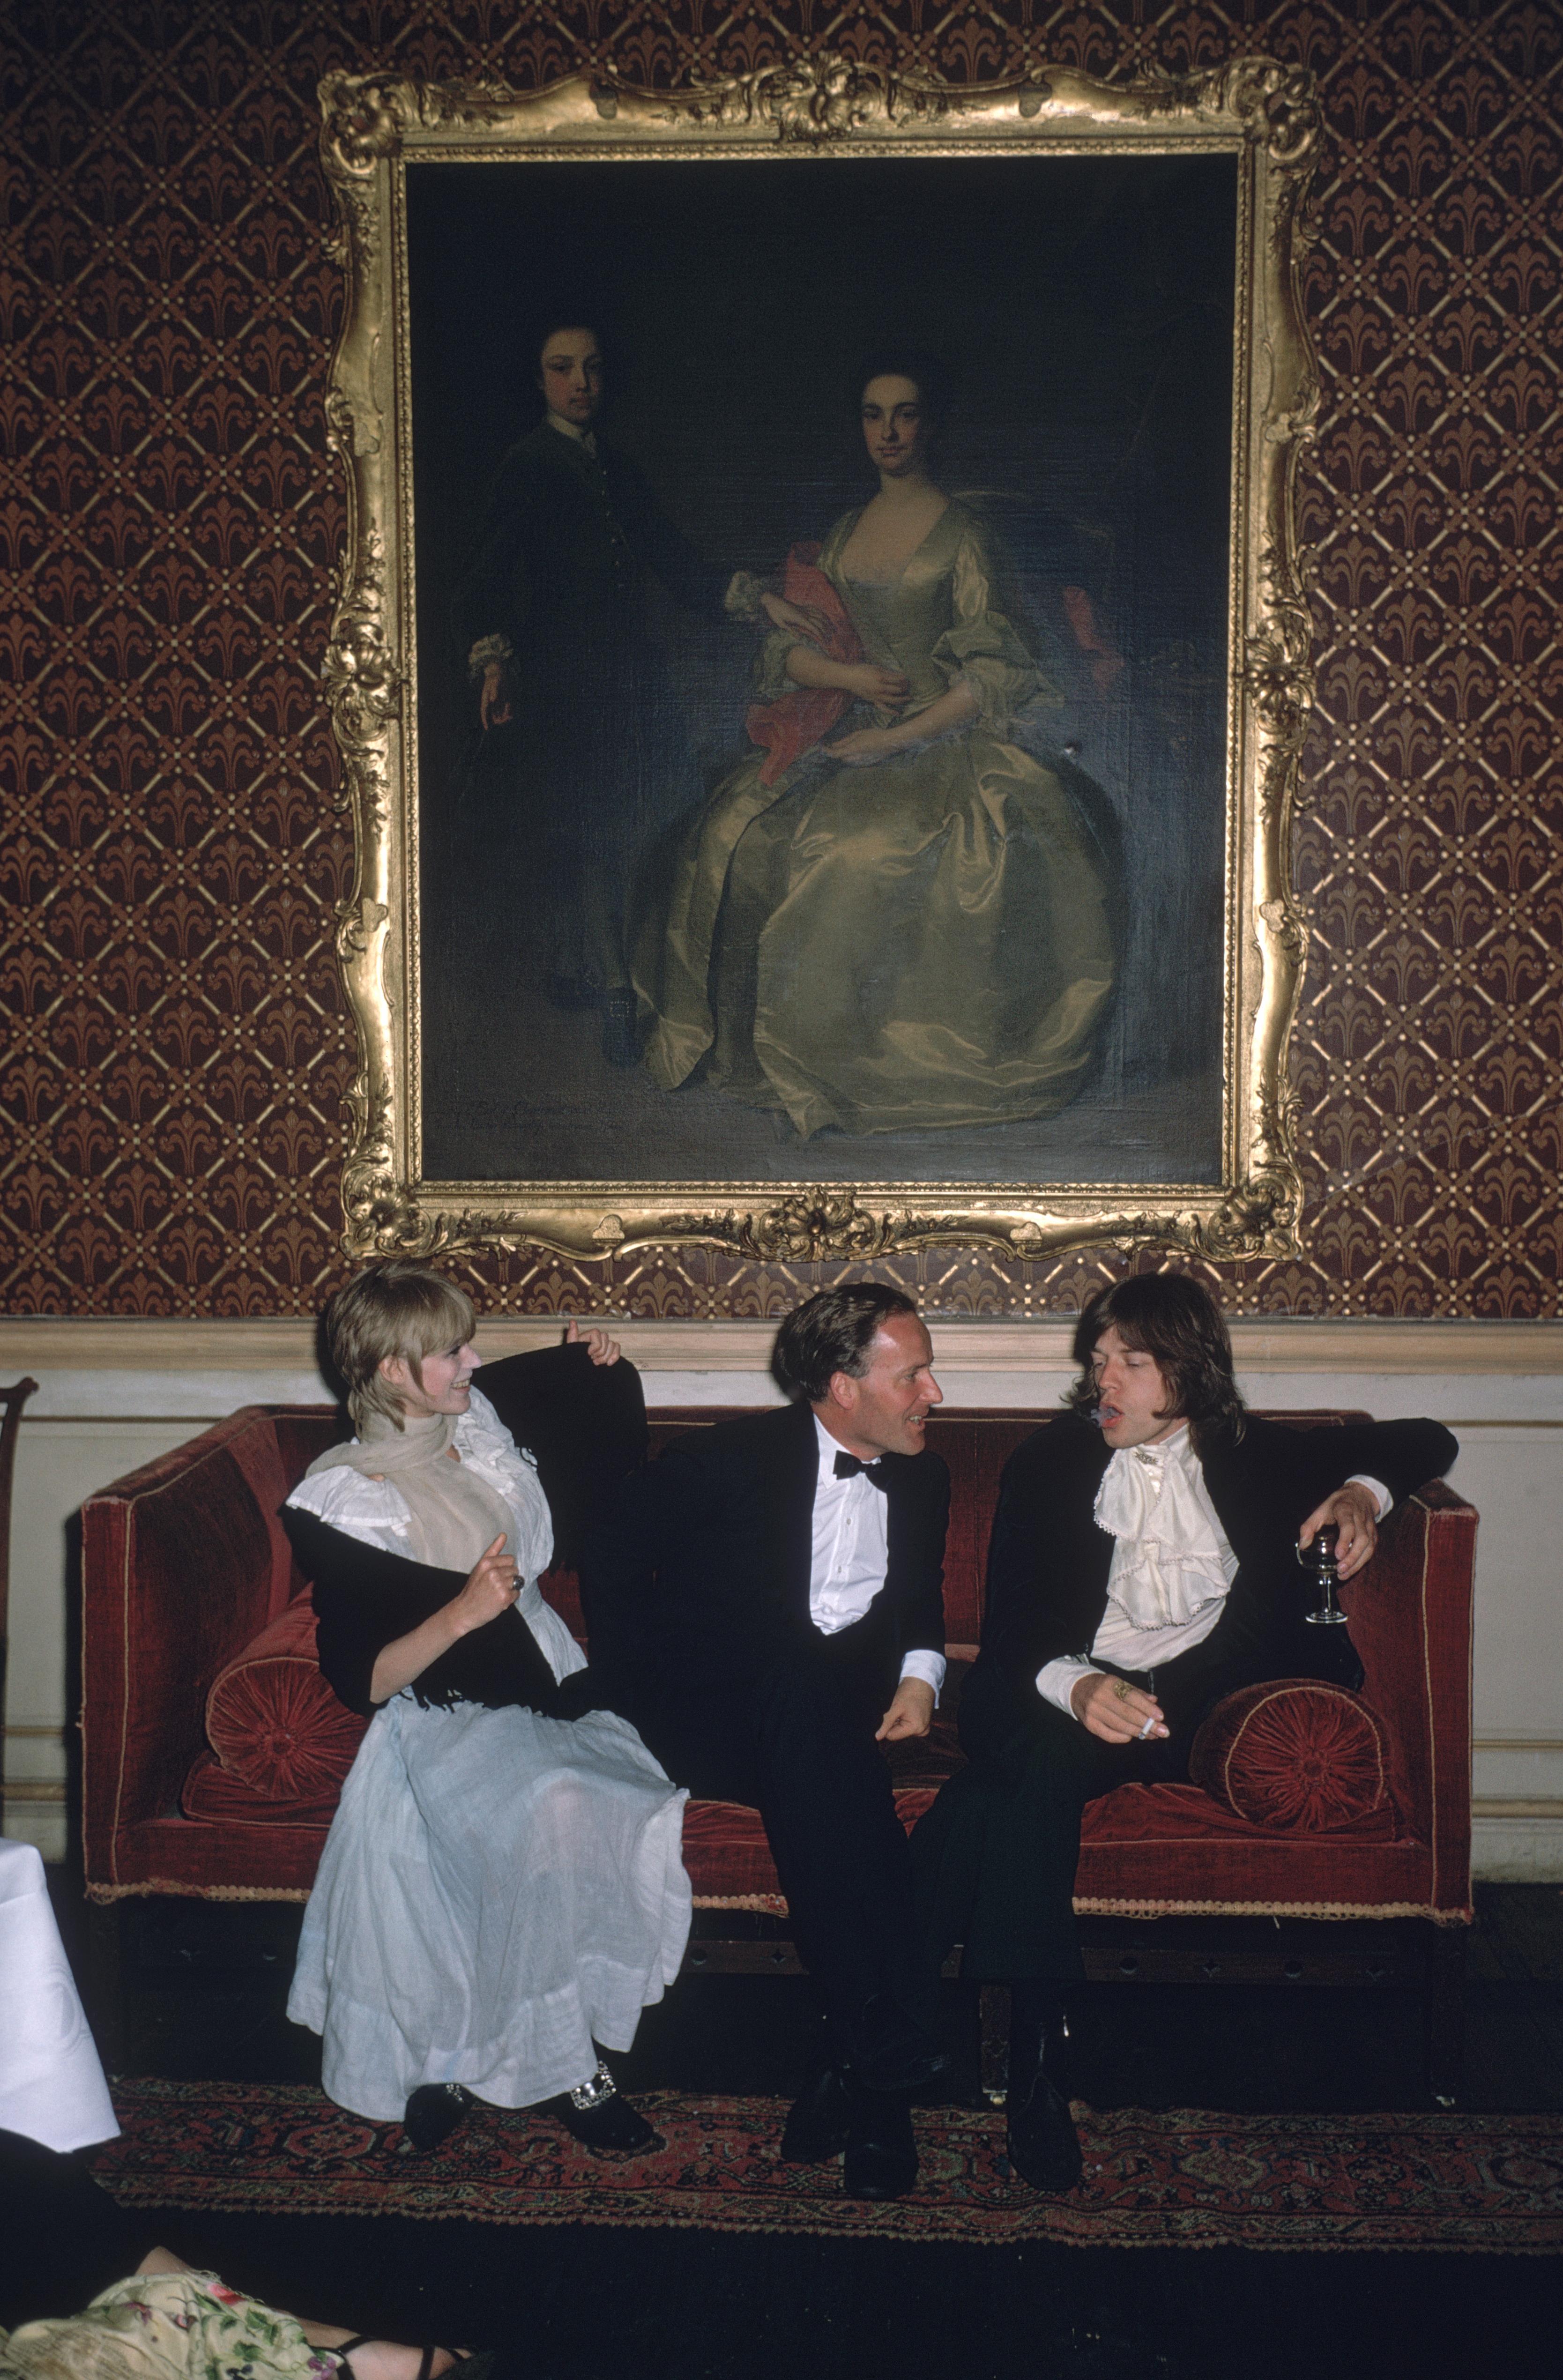 'Pop And Society' 1968 Slim Aarons Limited Estate Edition
1968: From left to right; singer Marianne Faithfull, the Honorable Desmond Guinness, and Mick Jagger (of the Rolling Stones) sit on a sofa under a large gilt-framed painting of a woman in